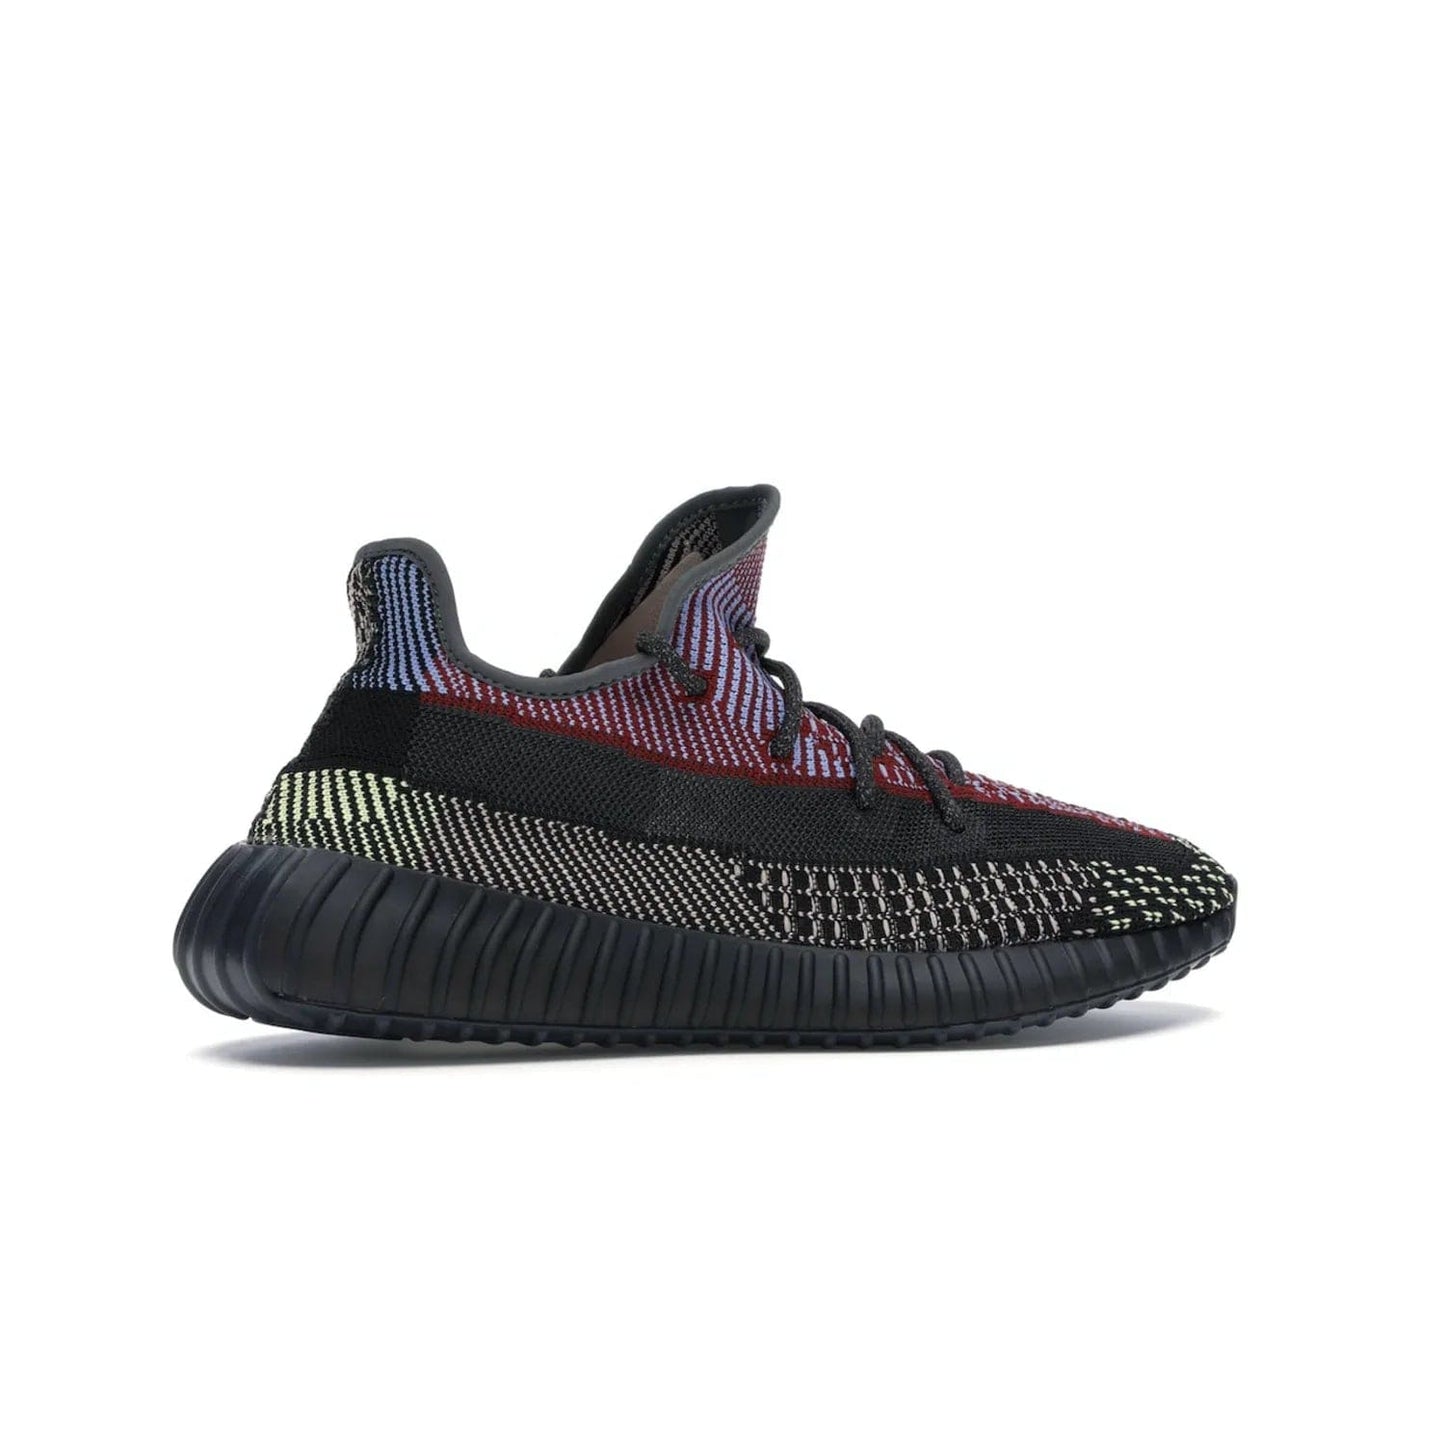 adidas Yeezy Boost 350 V2 Yecheil (Non-Reflective) - Image 35 - Only at www.BallersClubKickz.com - Make a statement with the eye-catching adidas Yeezy Boost 350 V2 Yecheil Non-Reflective. Featuring a spectrum of colorful hues, black upper, Boost cushioning, and black side stripe, the sneaker brings a luxe yet playful finish to any outfit.